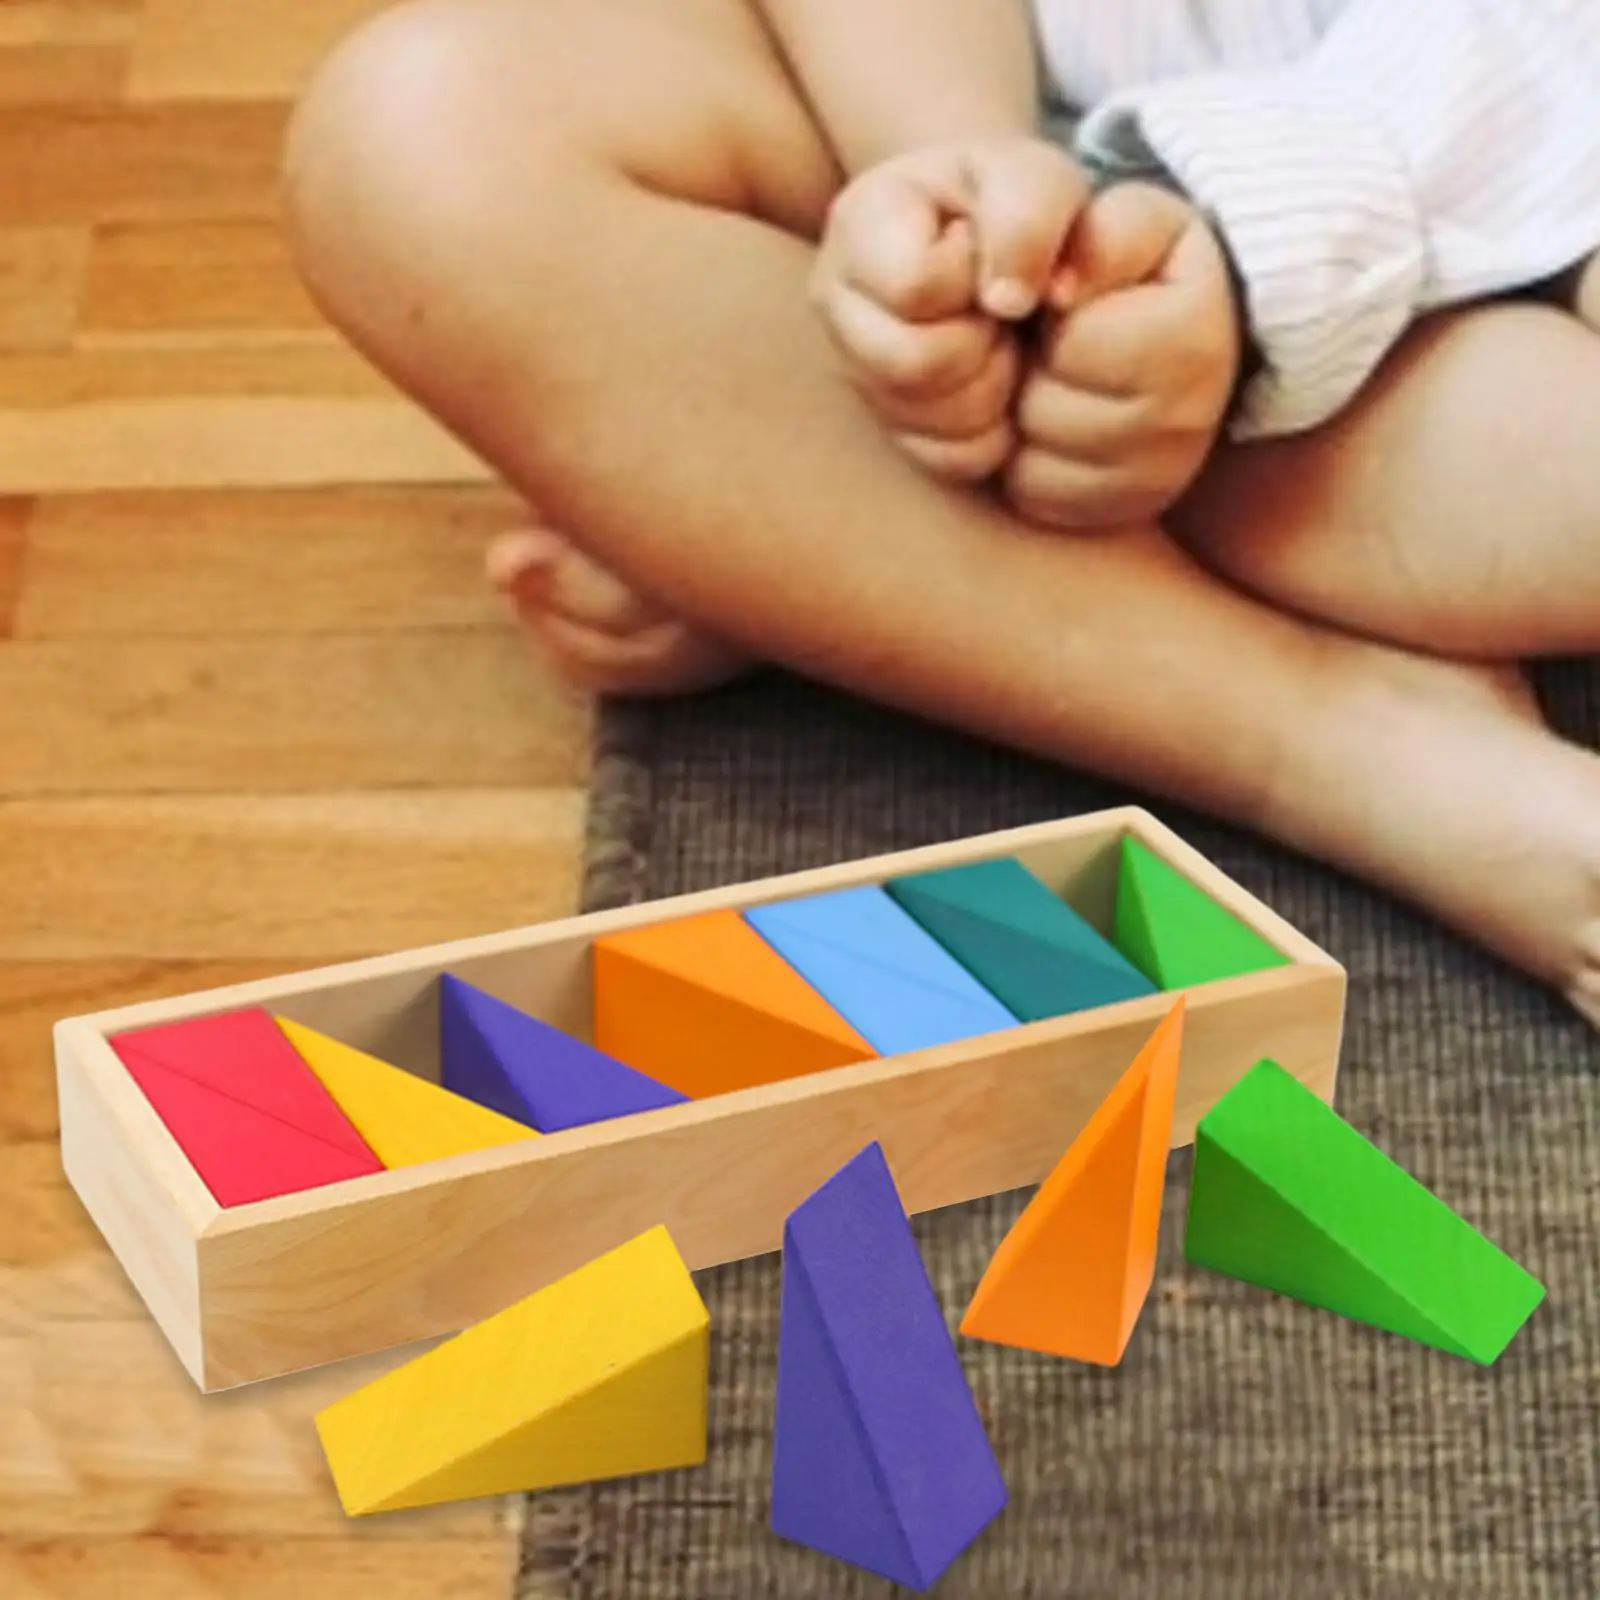 Rainbow Wood Block Stacking Building Early Learning Sensory Toys Birthday